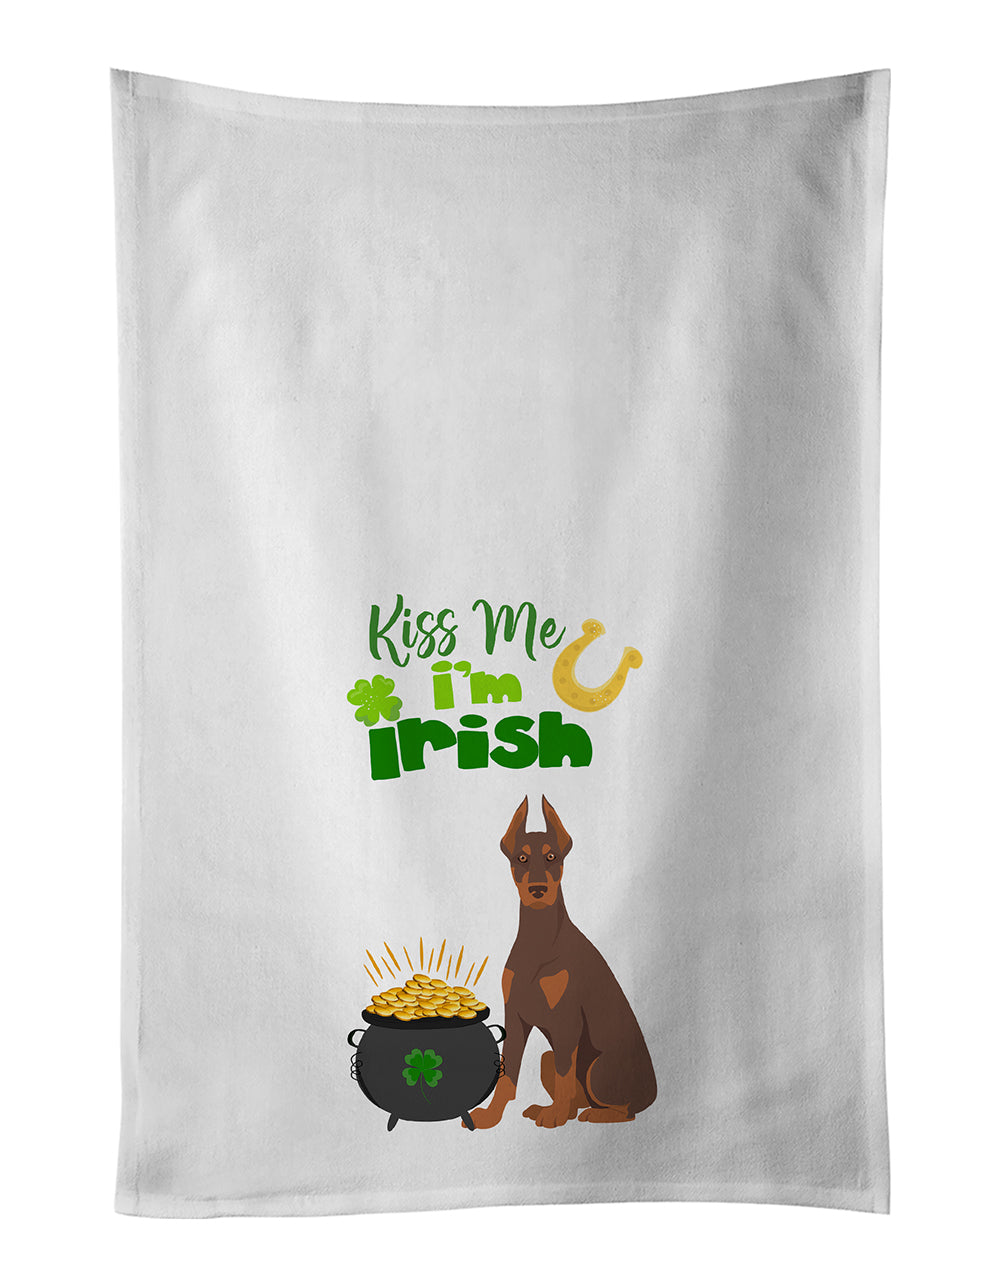 Buy this Red and Tan Doberman Pinscher St. Patrick's Day White Kitchen Towel Set of 2 Dish Towels